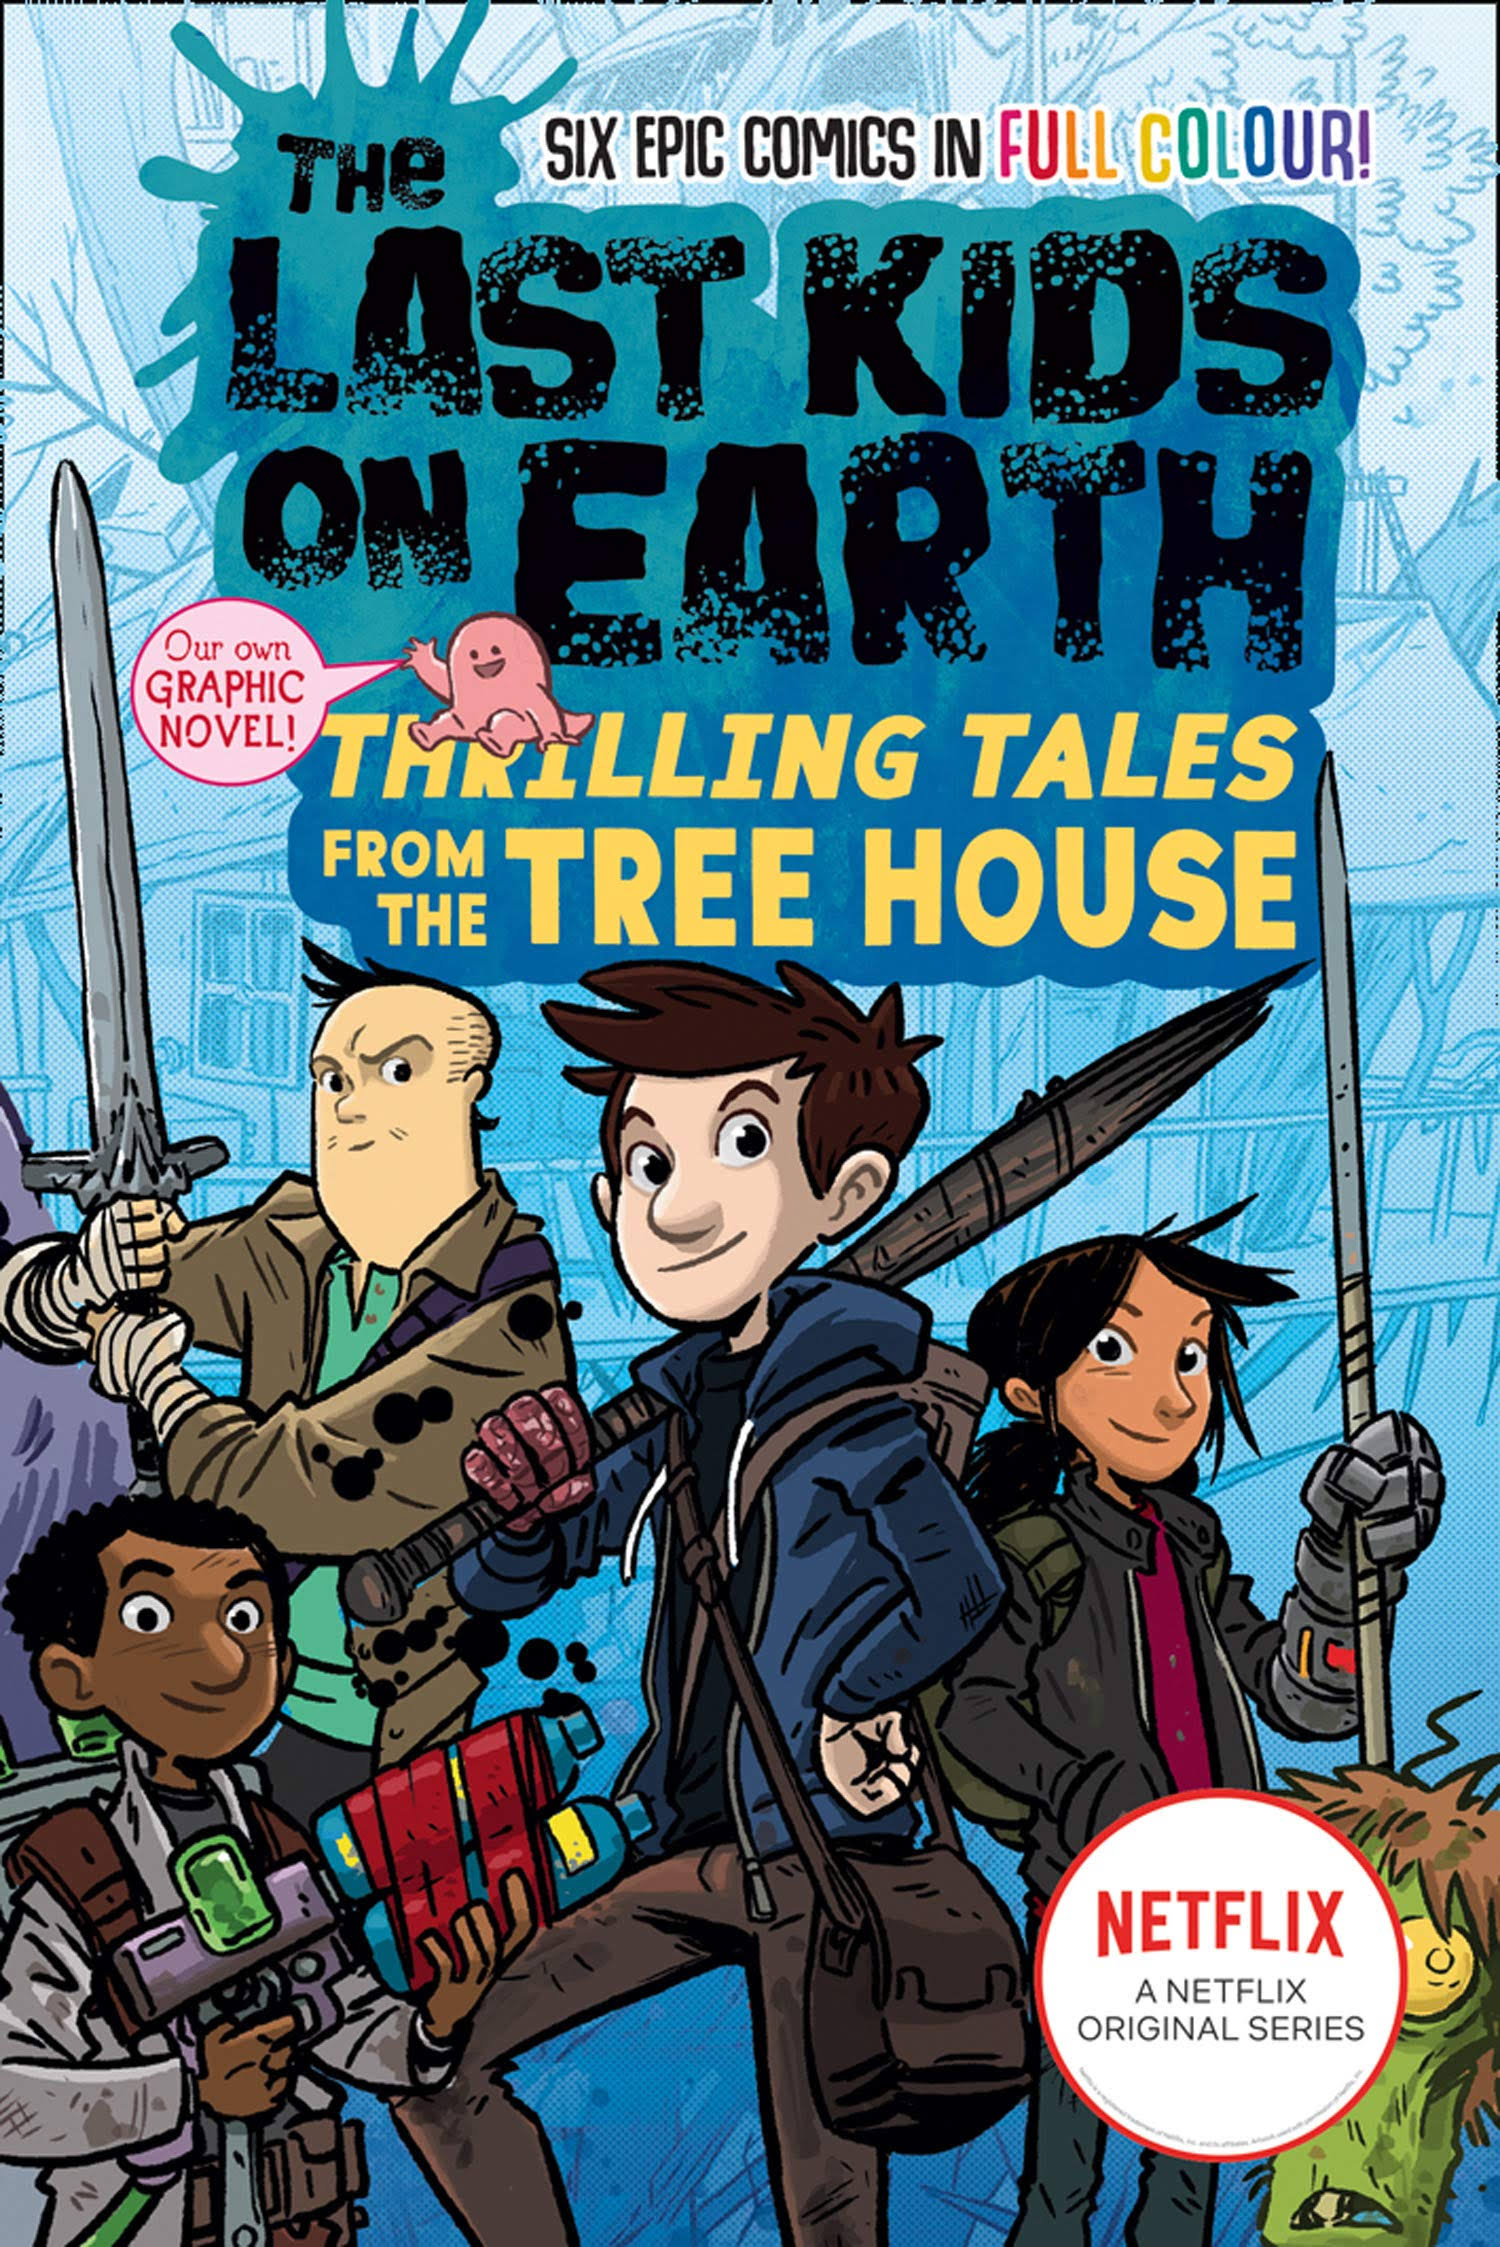 The Last Kids on Earth: Thrilling Tales from the Tree House [Book]